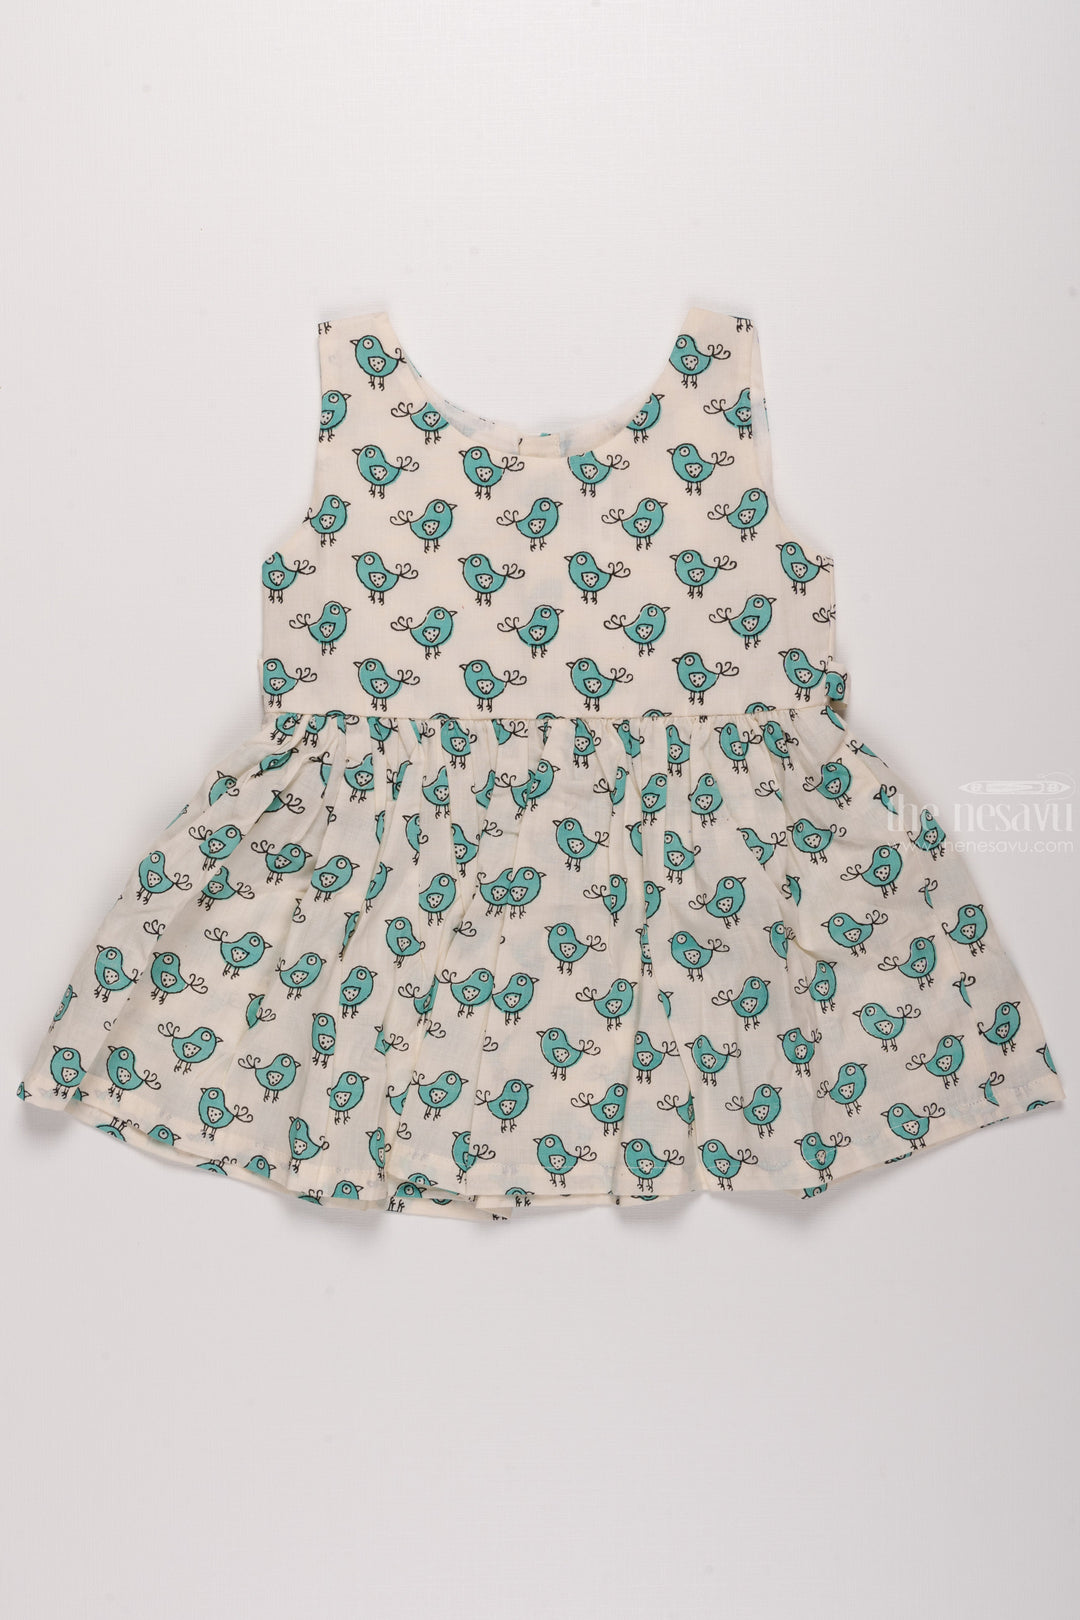 The Nesavu Baby Cotton Frocks Tweeting Tales: Charming Bird-Printed Baby Cotton Frock Nesavu 12 (3M) / White / Cotton BFJ491A-12 Stylish Baby Frock Designs | Trendsetting Dresses for Little Ones | The Nesavu